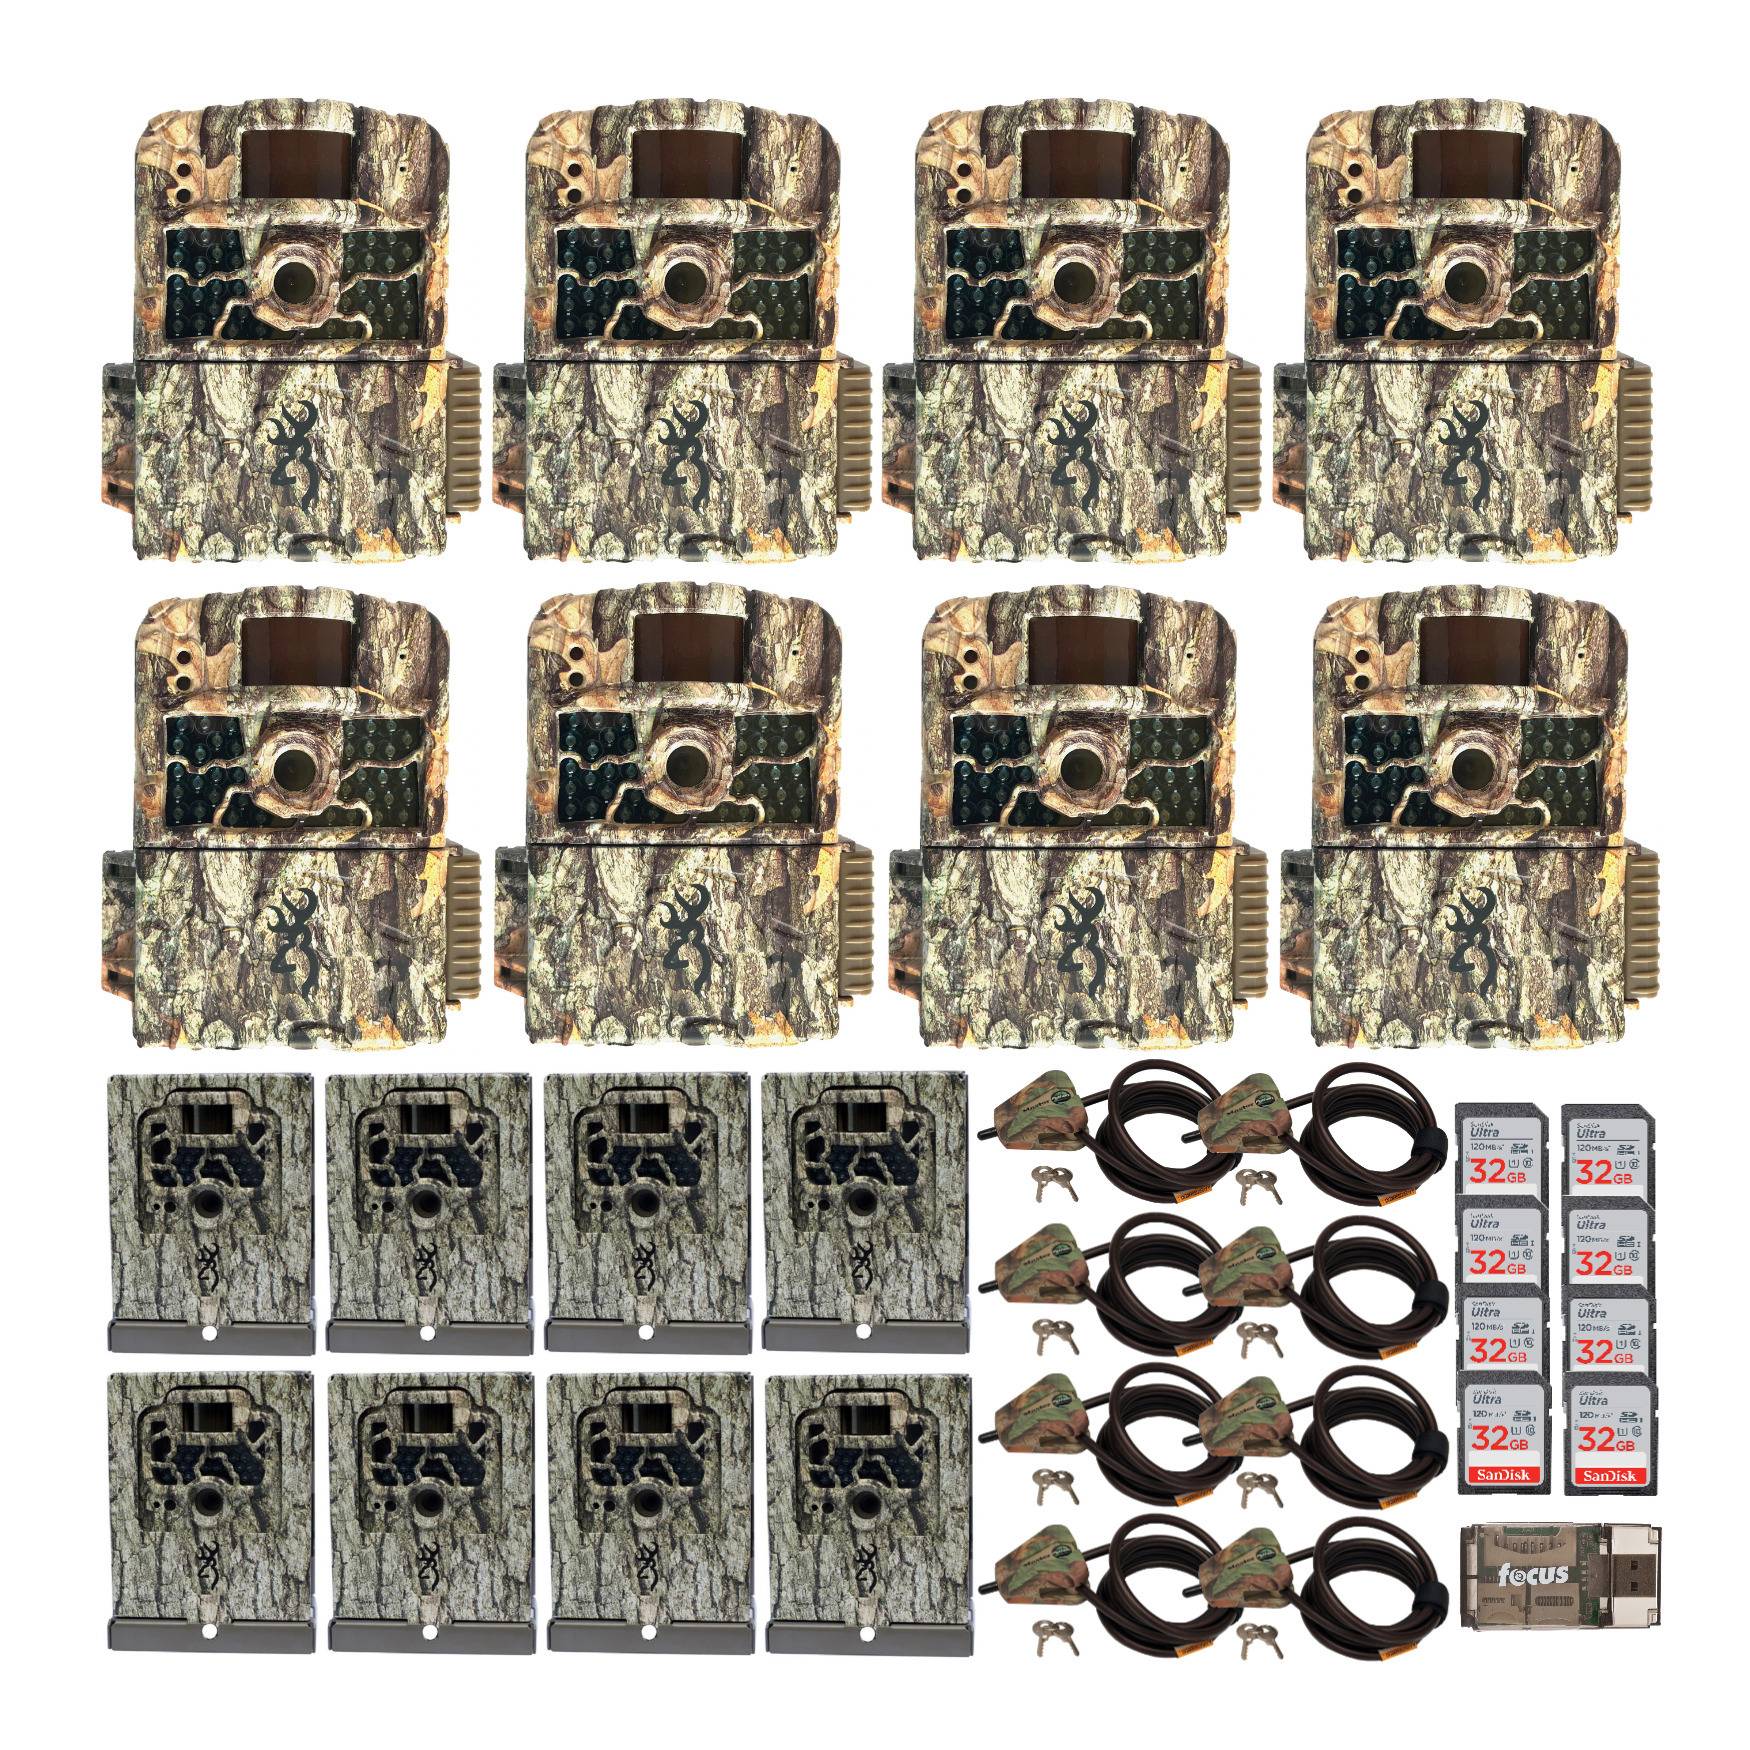 Browning Trail Cameras 18MP Strike Force HD Max Trail Camera Security Bundle (8-Pack)